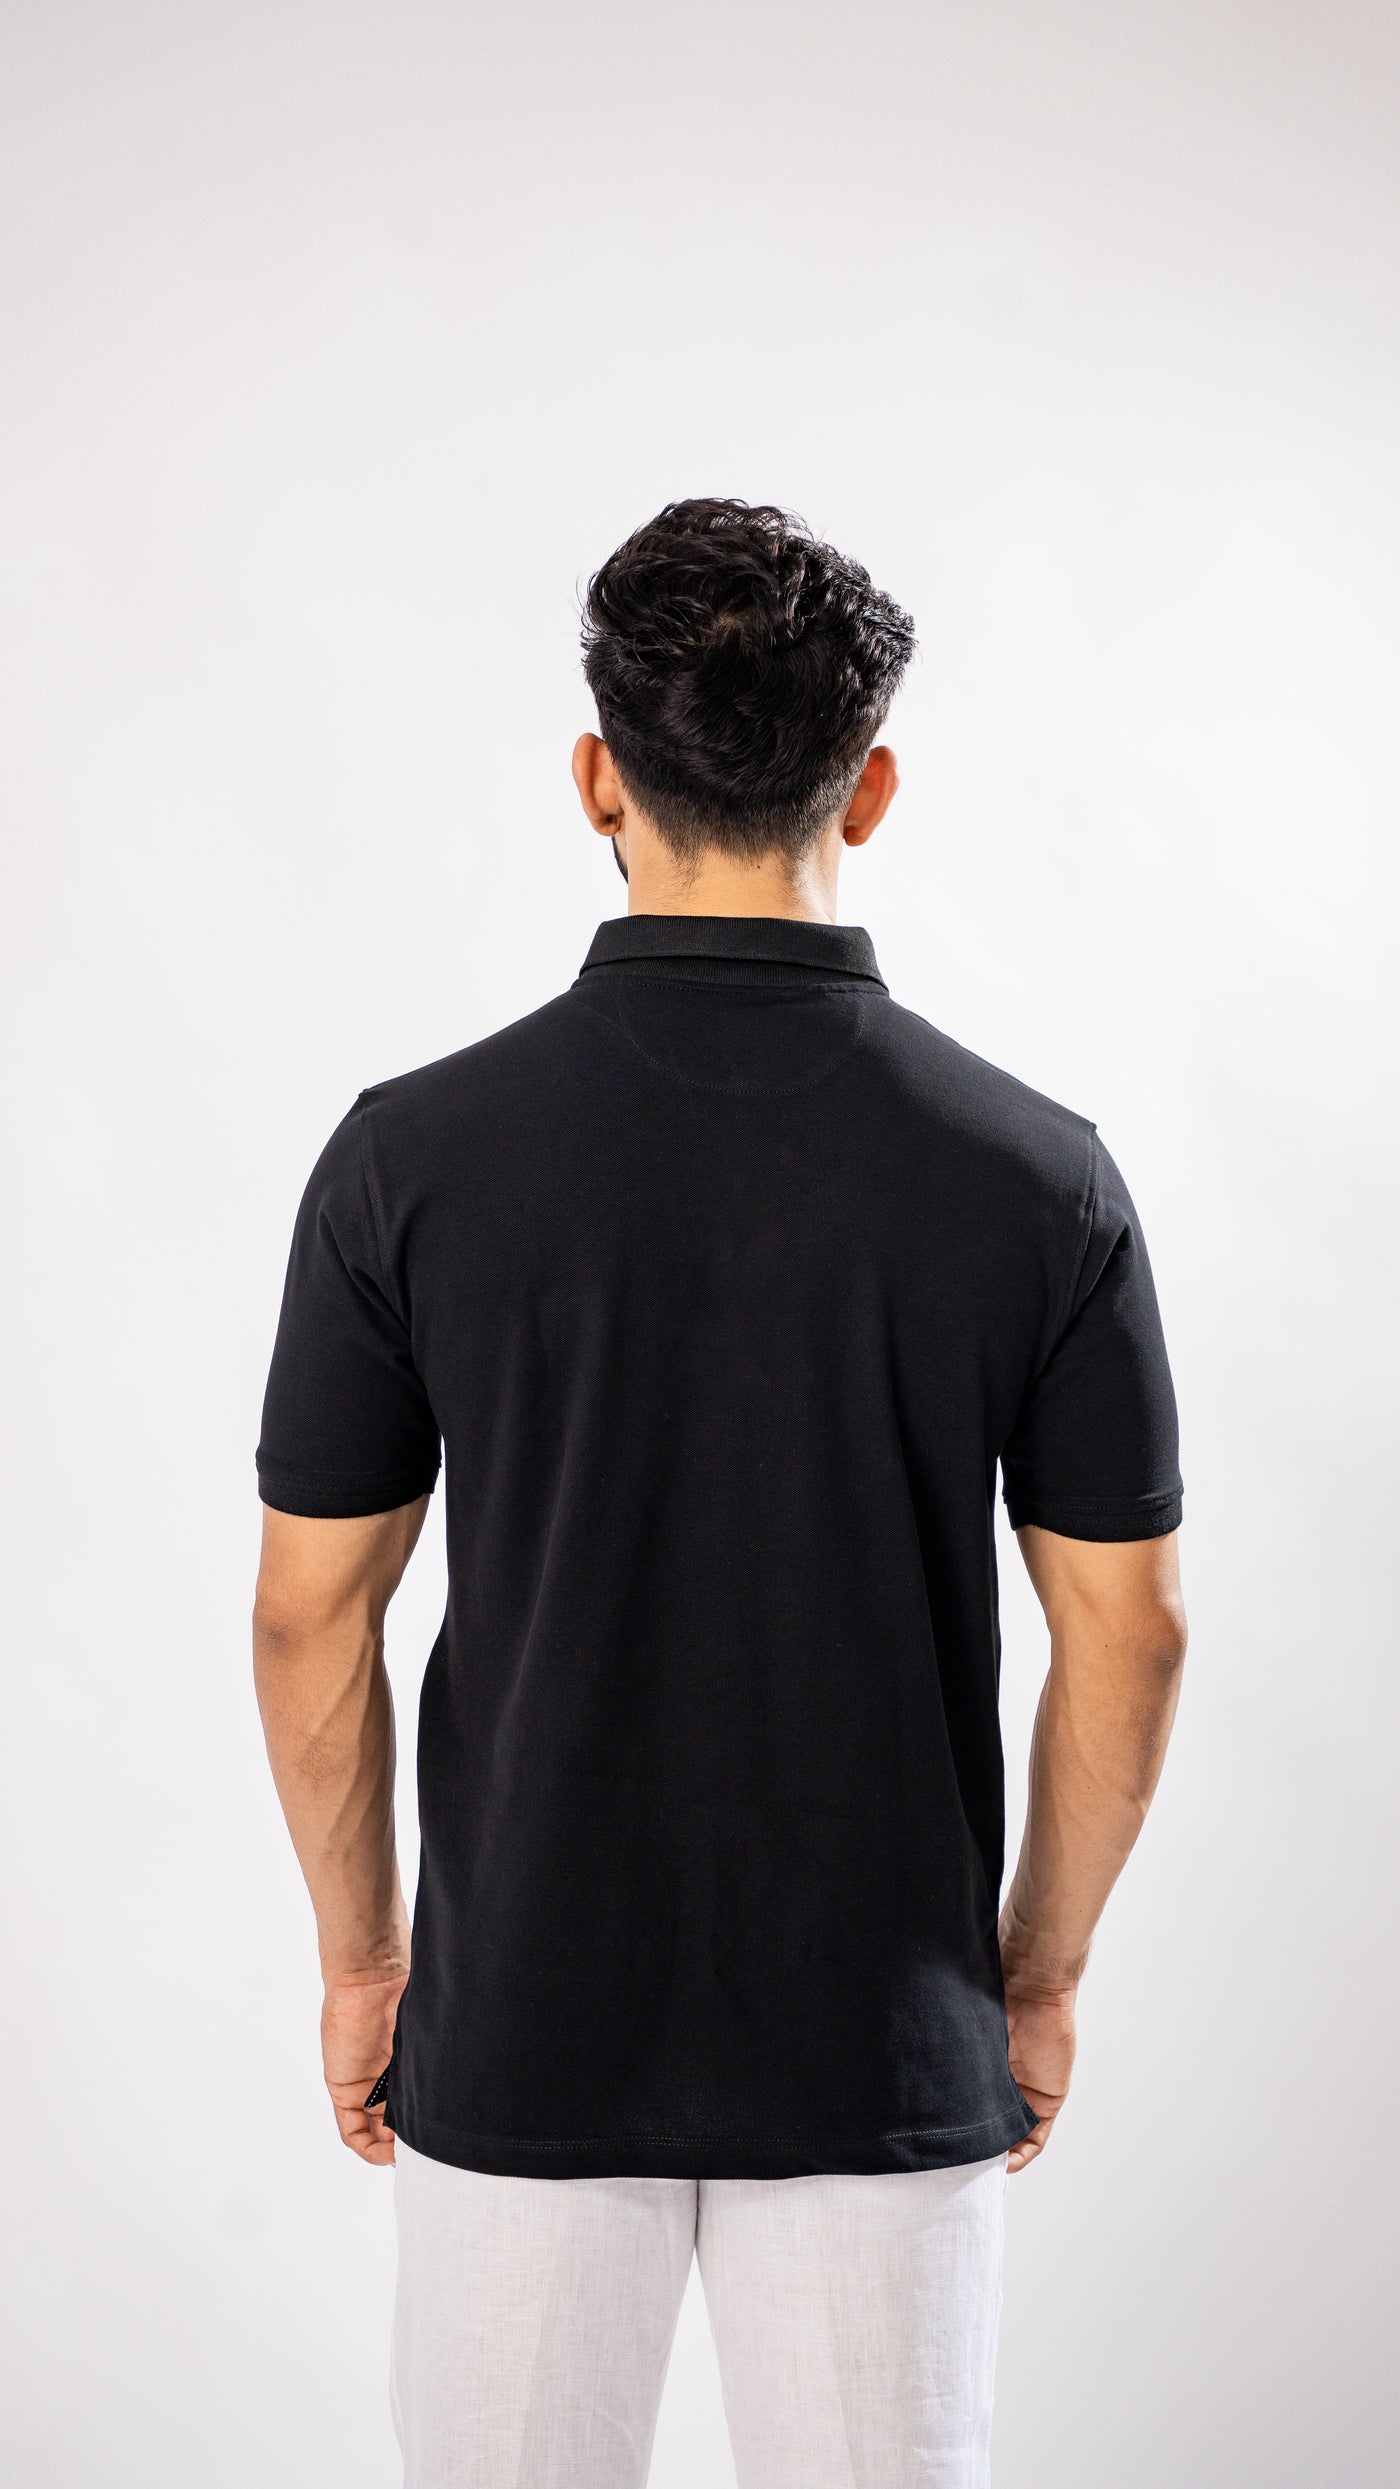 BLACK AND SILVER STRIPED ORGANIC COTTON MERCERISED PIQUE POLO TEE - Royaltail